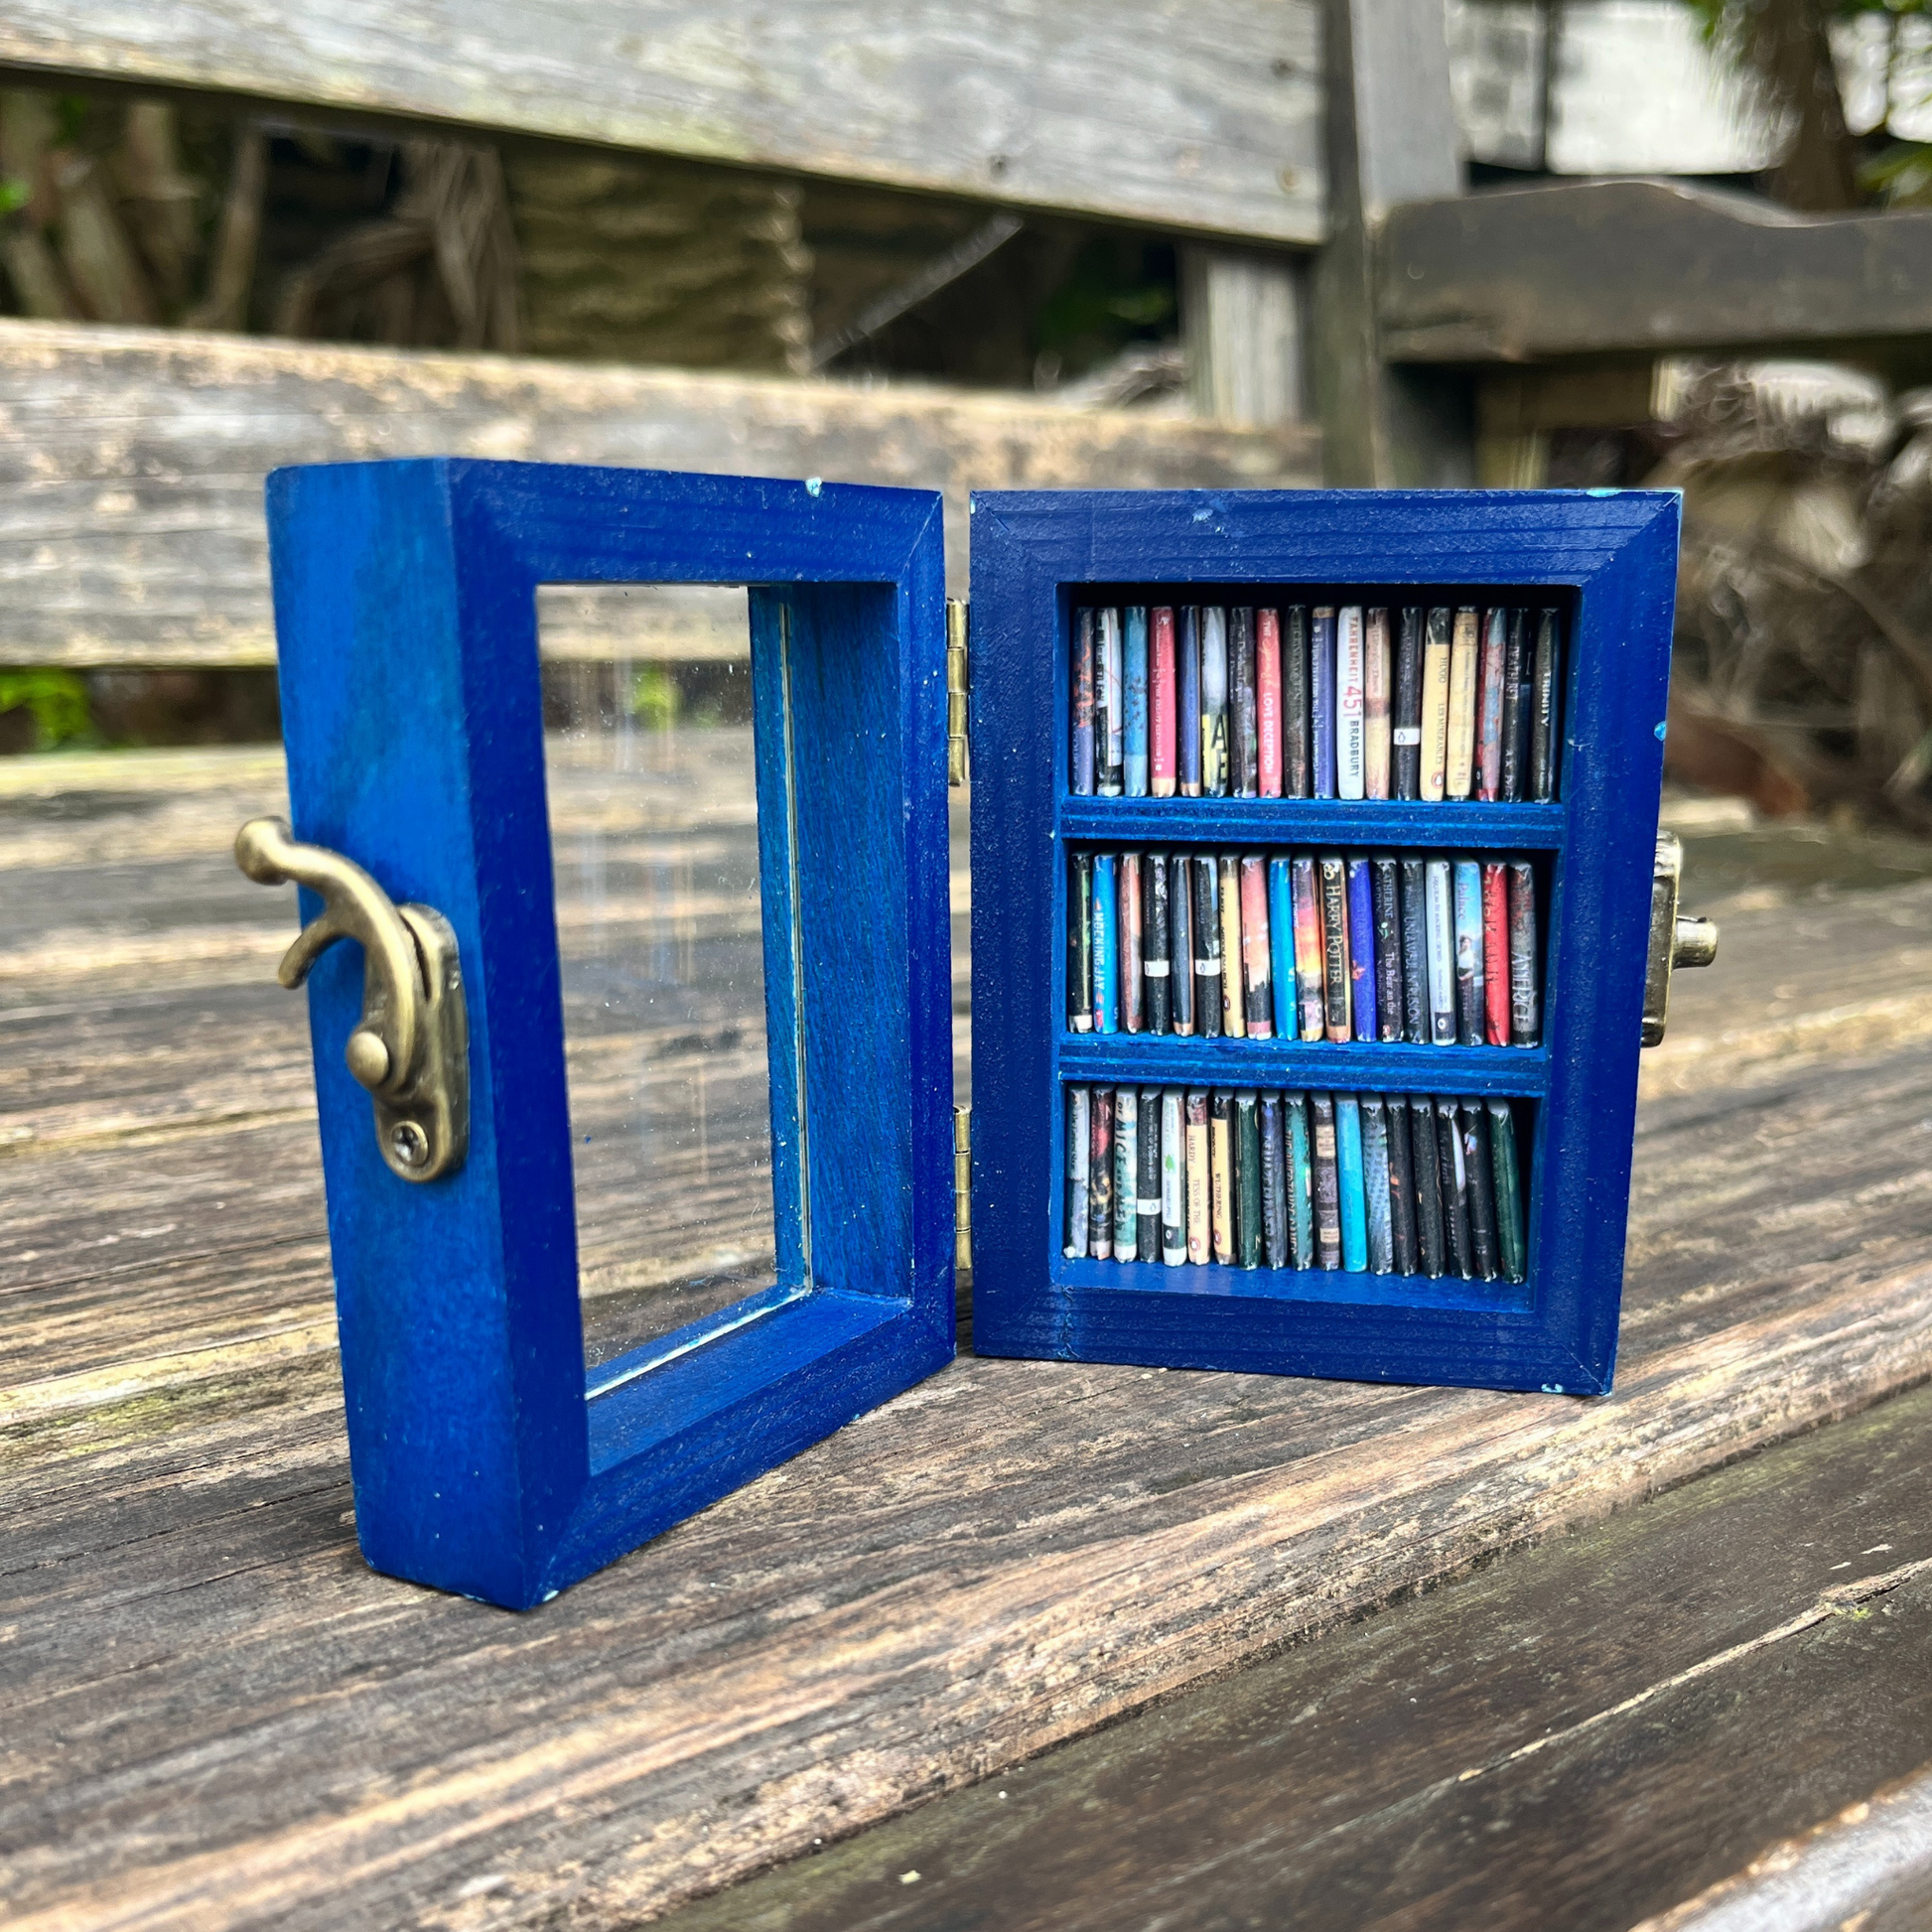 The tardis blue pocket anxiety bookshelf sits displayed open and organized on a wood bench.